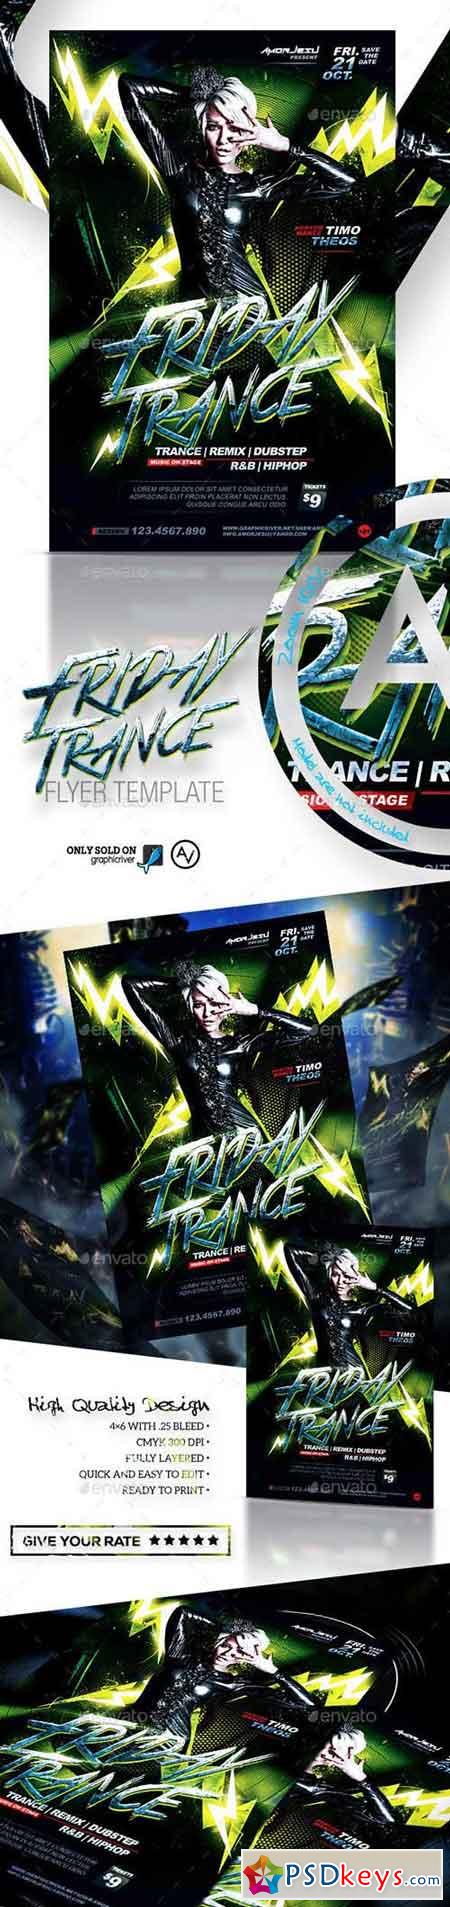 Friday Trance Flyer Template 11582071